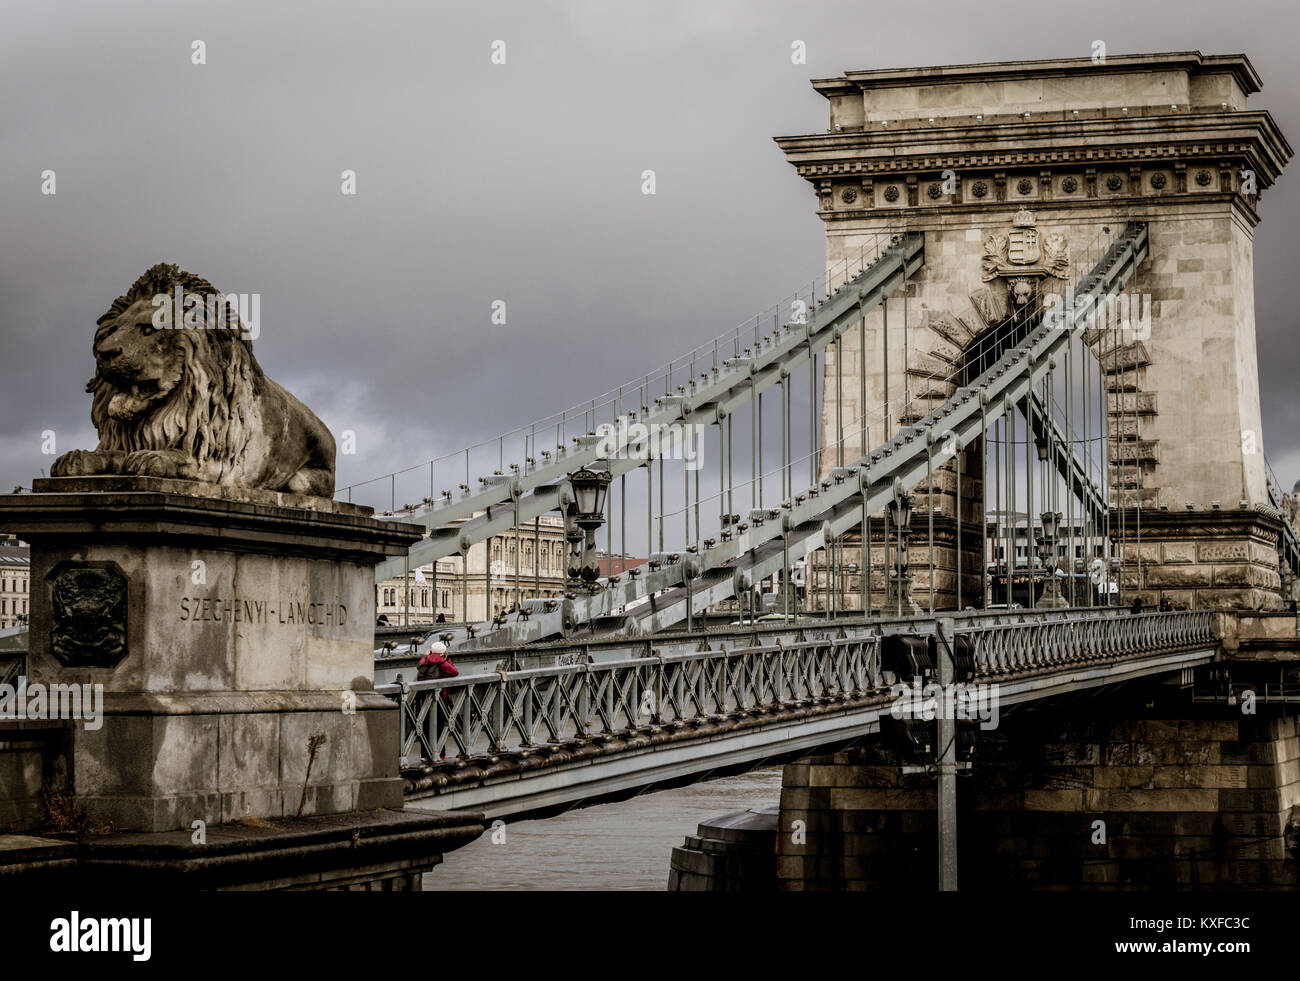 Széchenyi Lánchíd, Chain Bridge with a lion statue at the bridgehead, Danube River, Budapest, Hungary, Europe Stock Photo